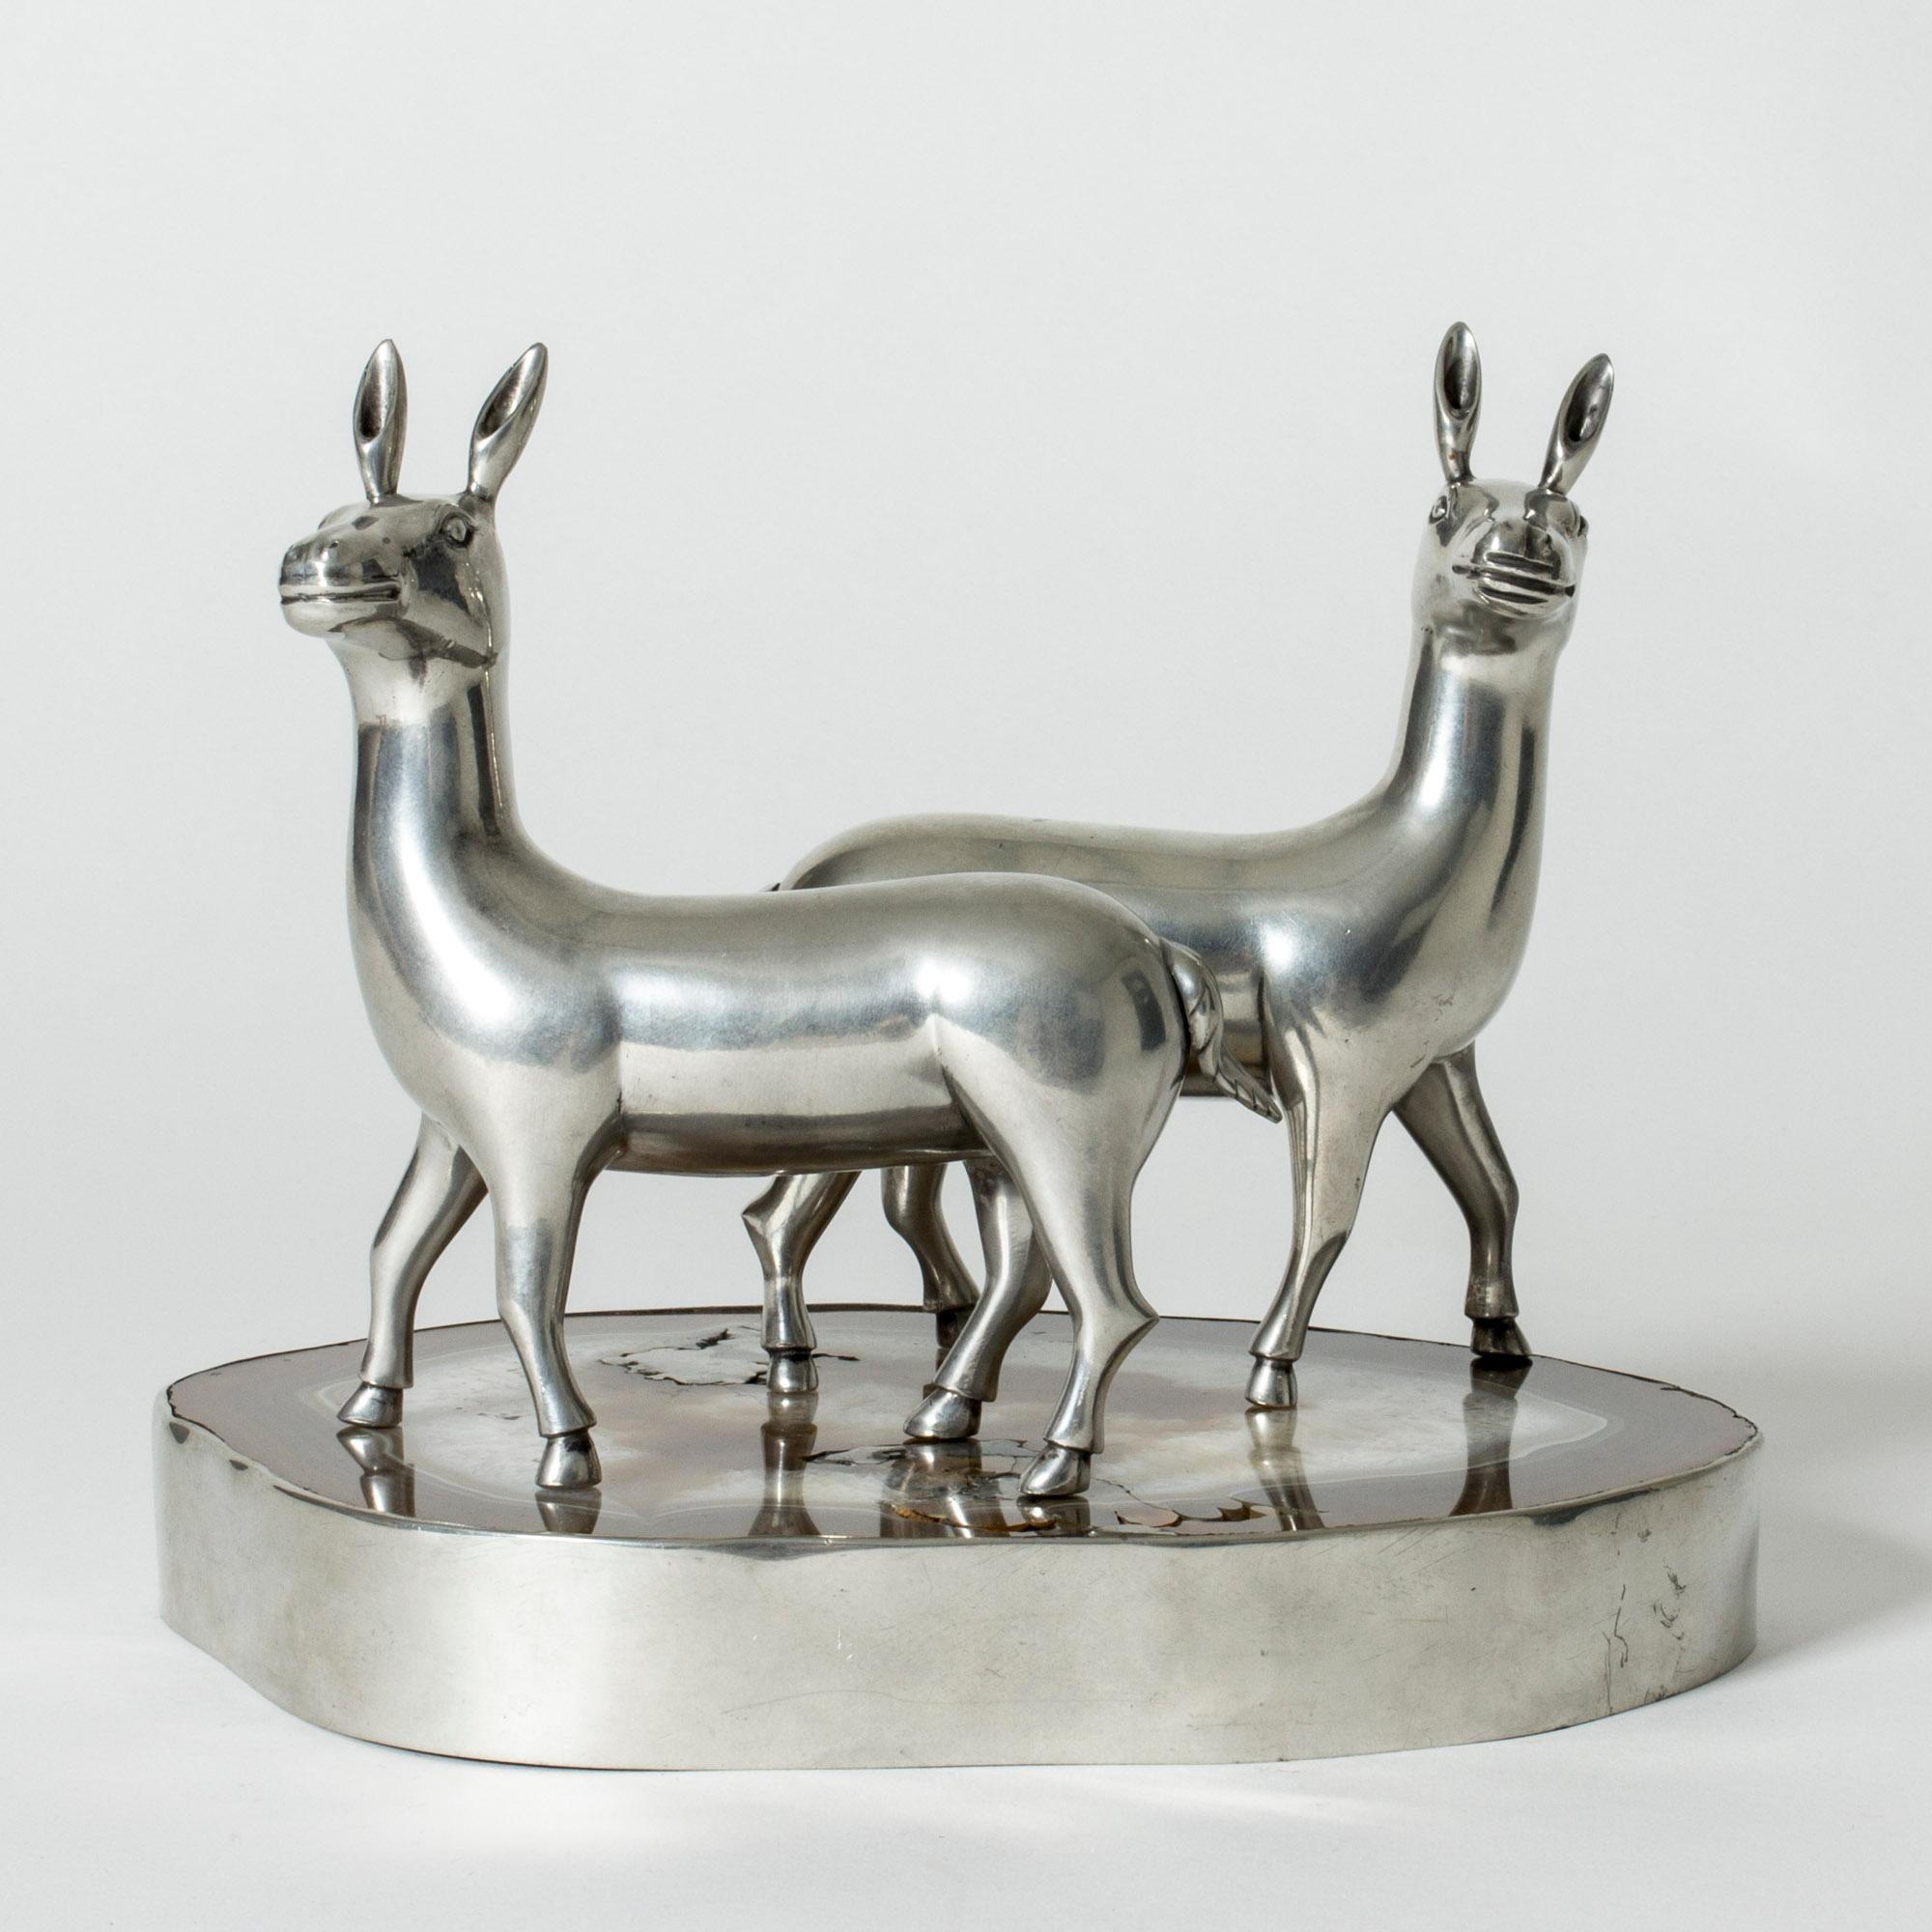 Amazing table center piece by Estrid Ericson, made from pewter and an agate slice encircled with by a pewter rim. Two lovely lama figurines stand on top of the agate tray. A whimsical and beautiful composition.